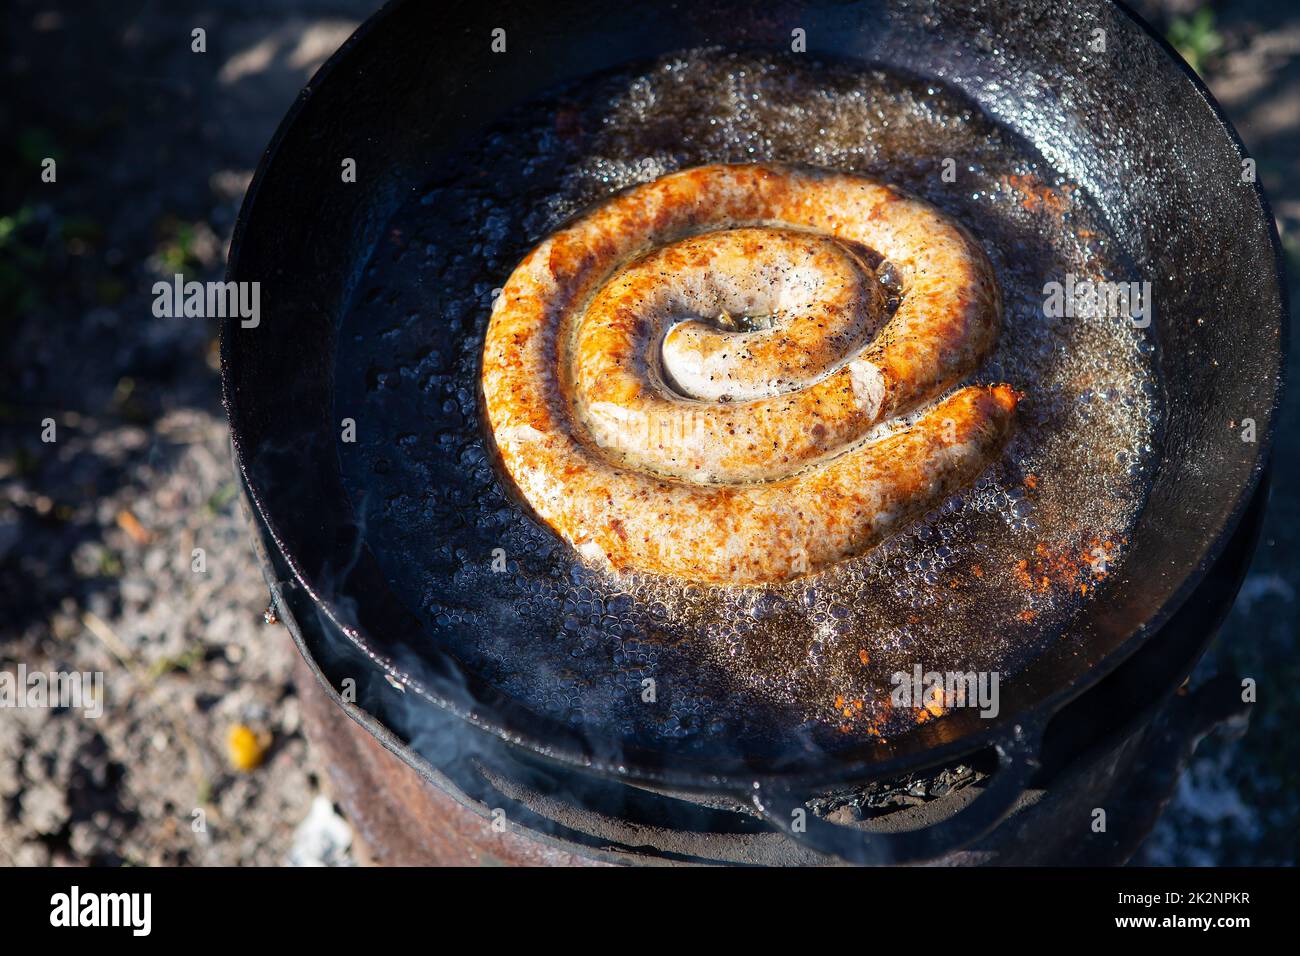 Homemade pork sausages in a rustic frying pan with different spices. Outdoor recreation. Stock Photo